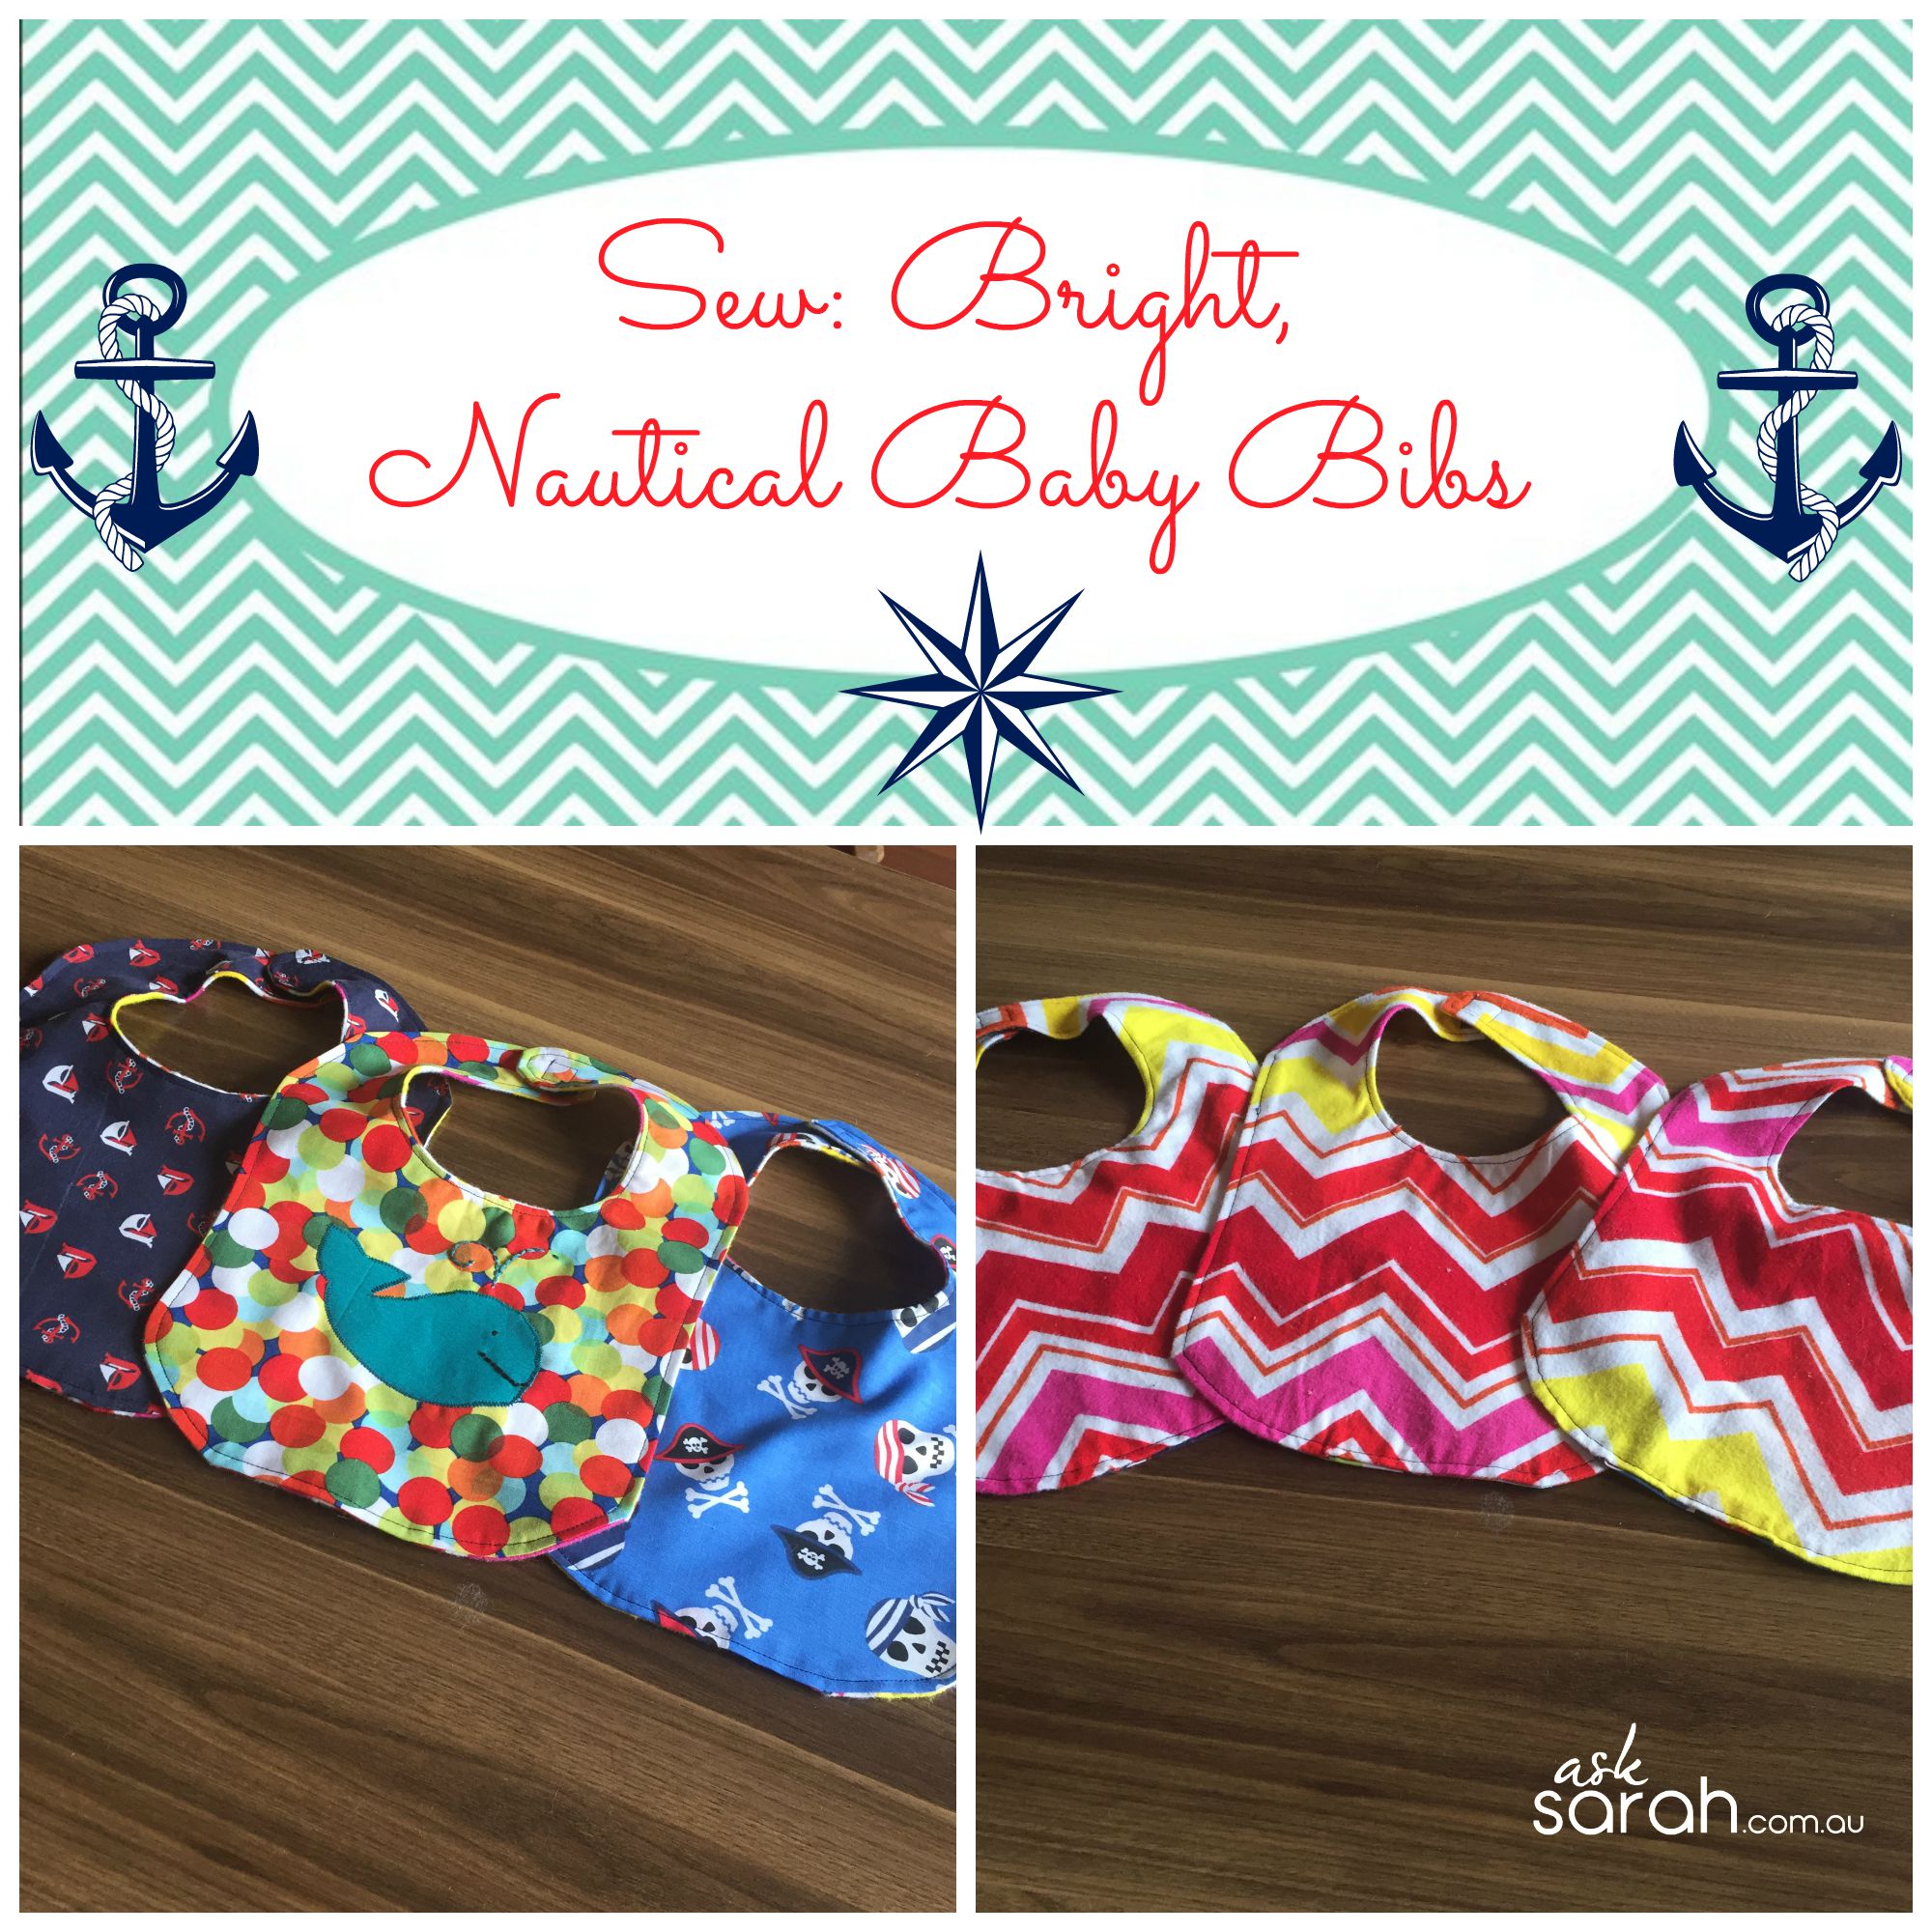 Sew: Bright, Nautical Baby Bibs {Link to Free Pattern Included}